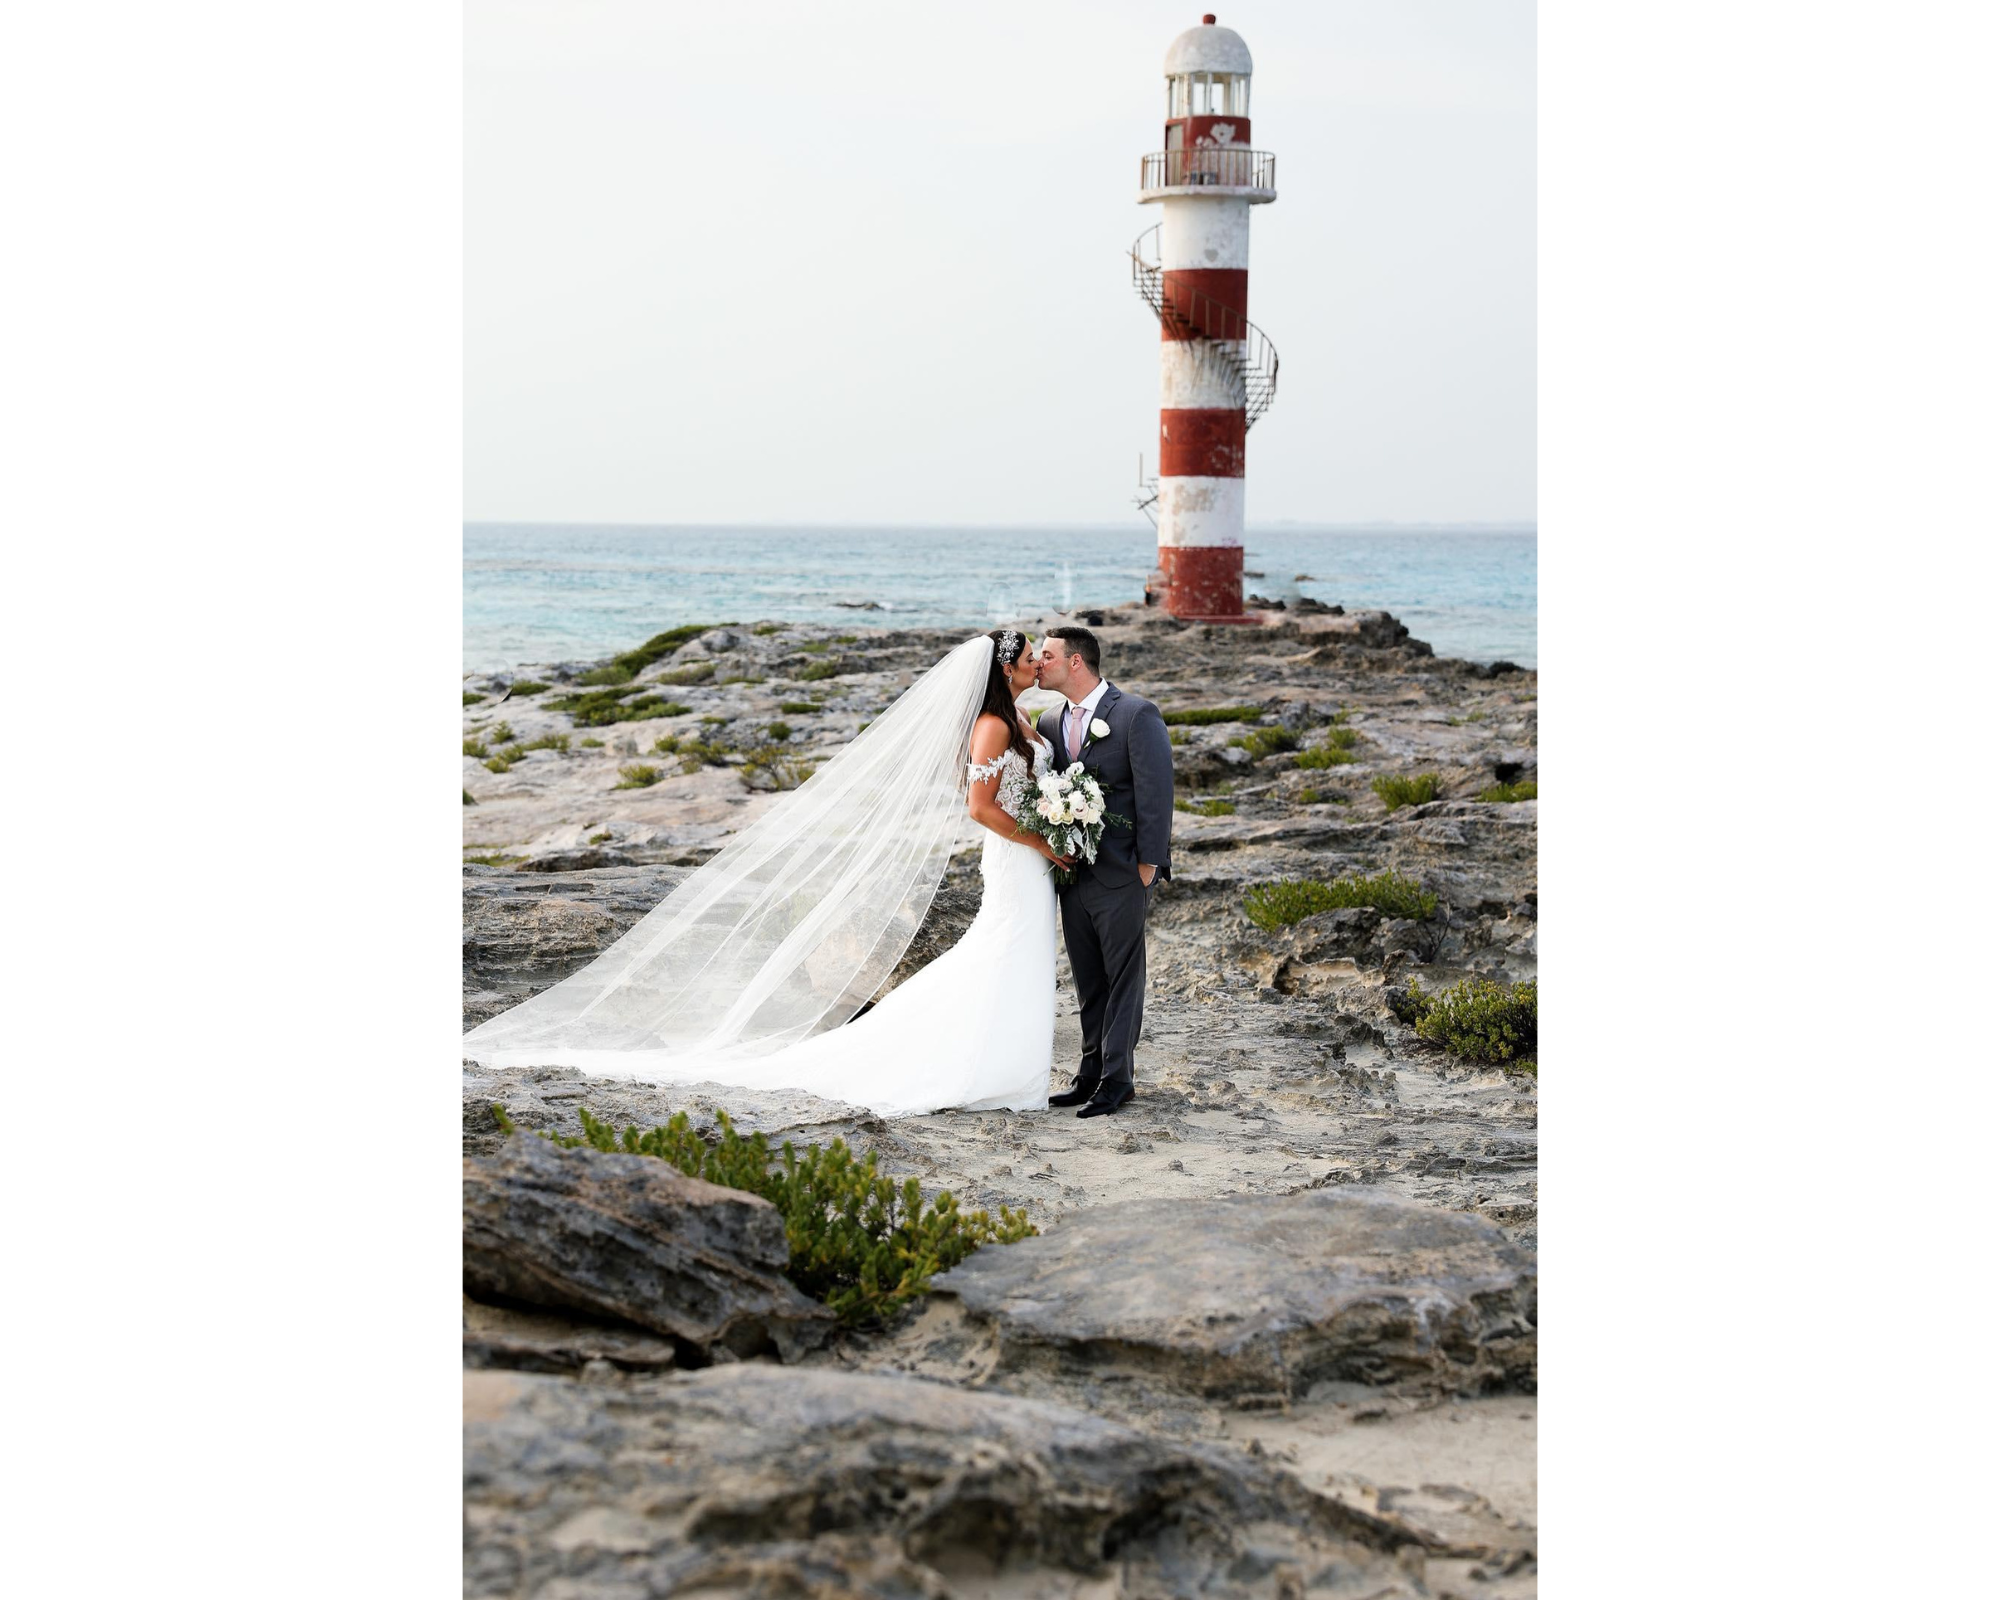 A beautiful bride and her new husband by a lighthouse. She's wearing her hair down with a custom Swarovski crystal hair vine.